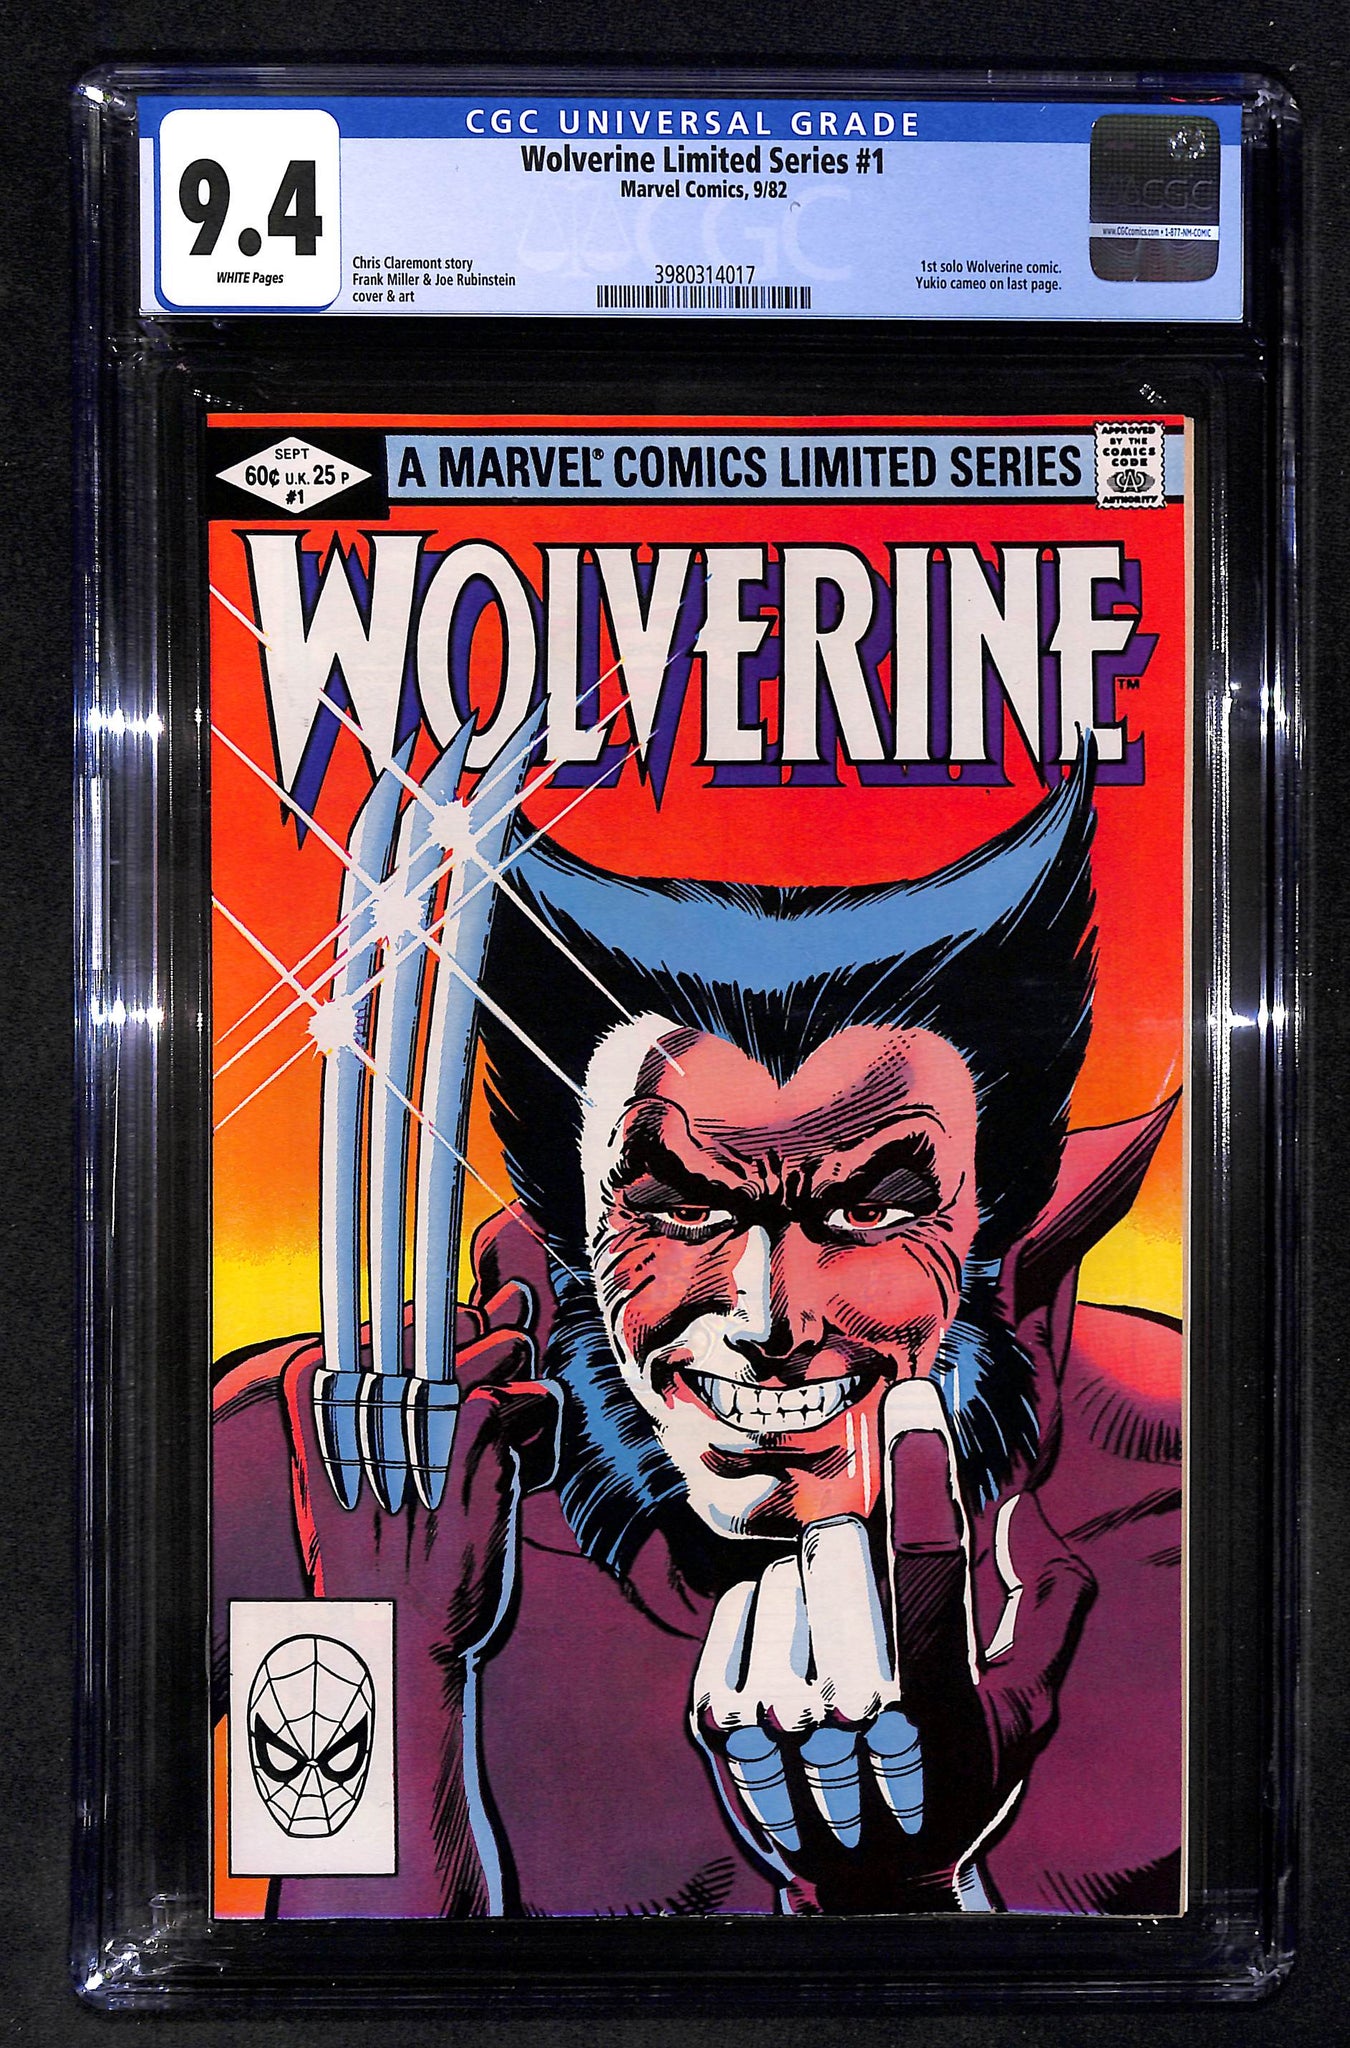 Wolverine Limited Series #1 CGC 9.4 1st solo Wolverine comic